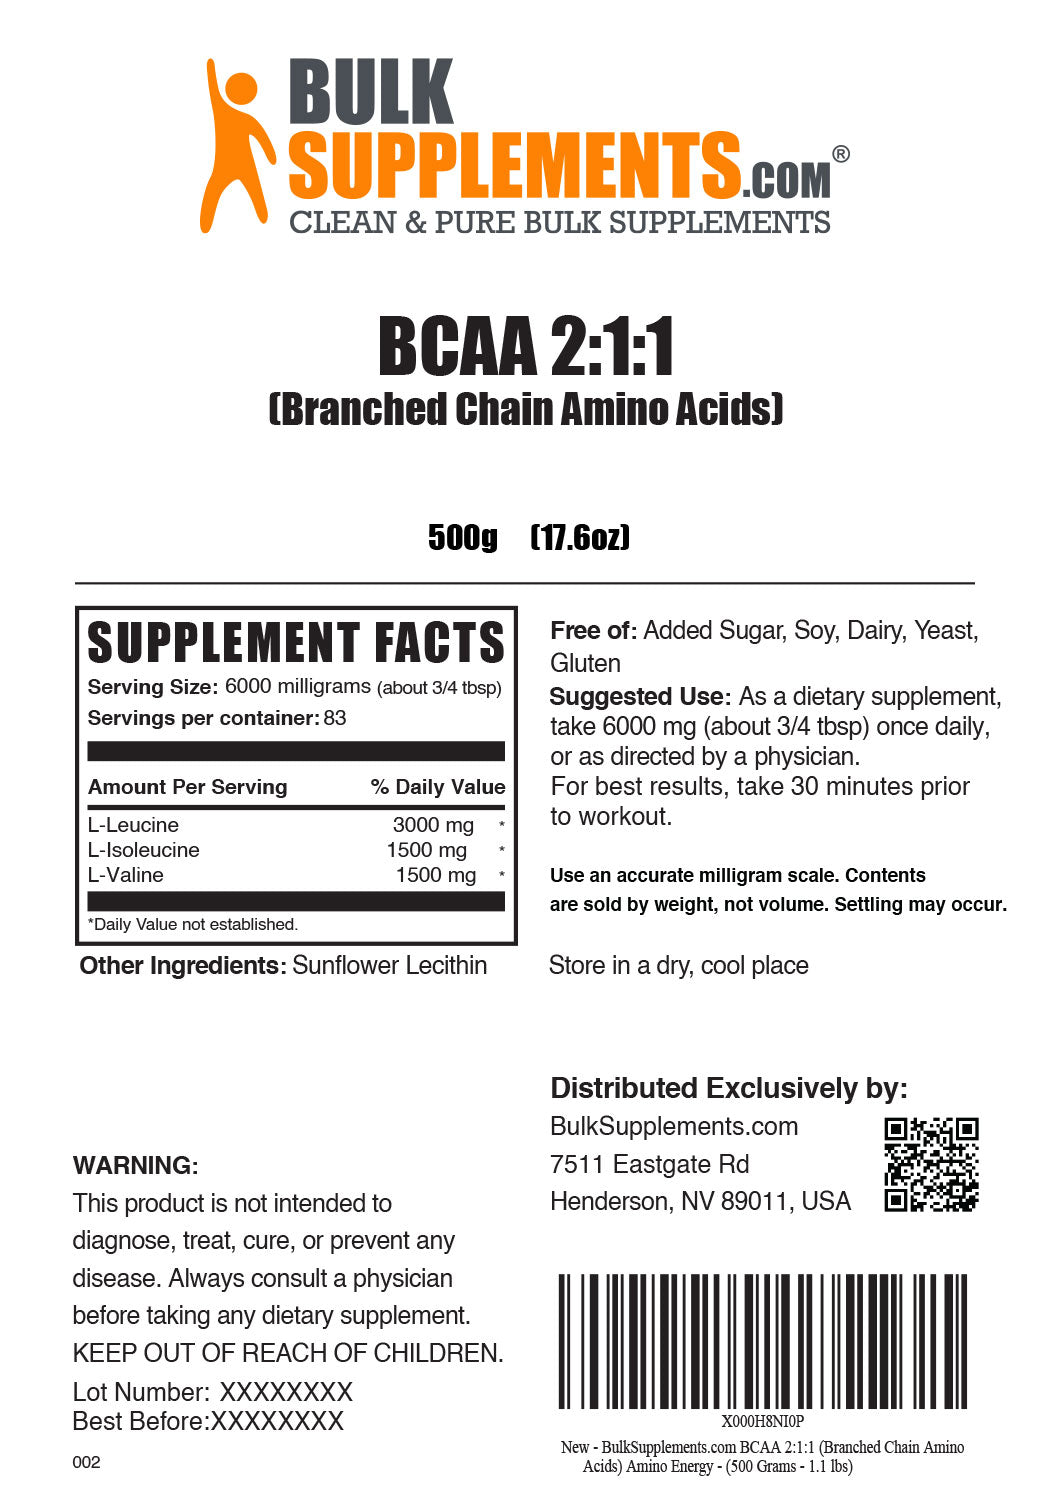 BCAA Powder Supplement Nutritional Facts and Serving Size for 500g bag